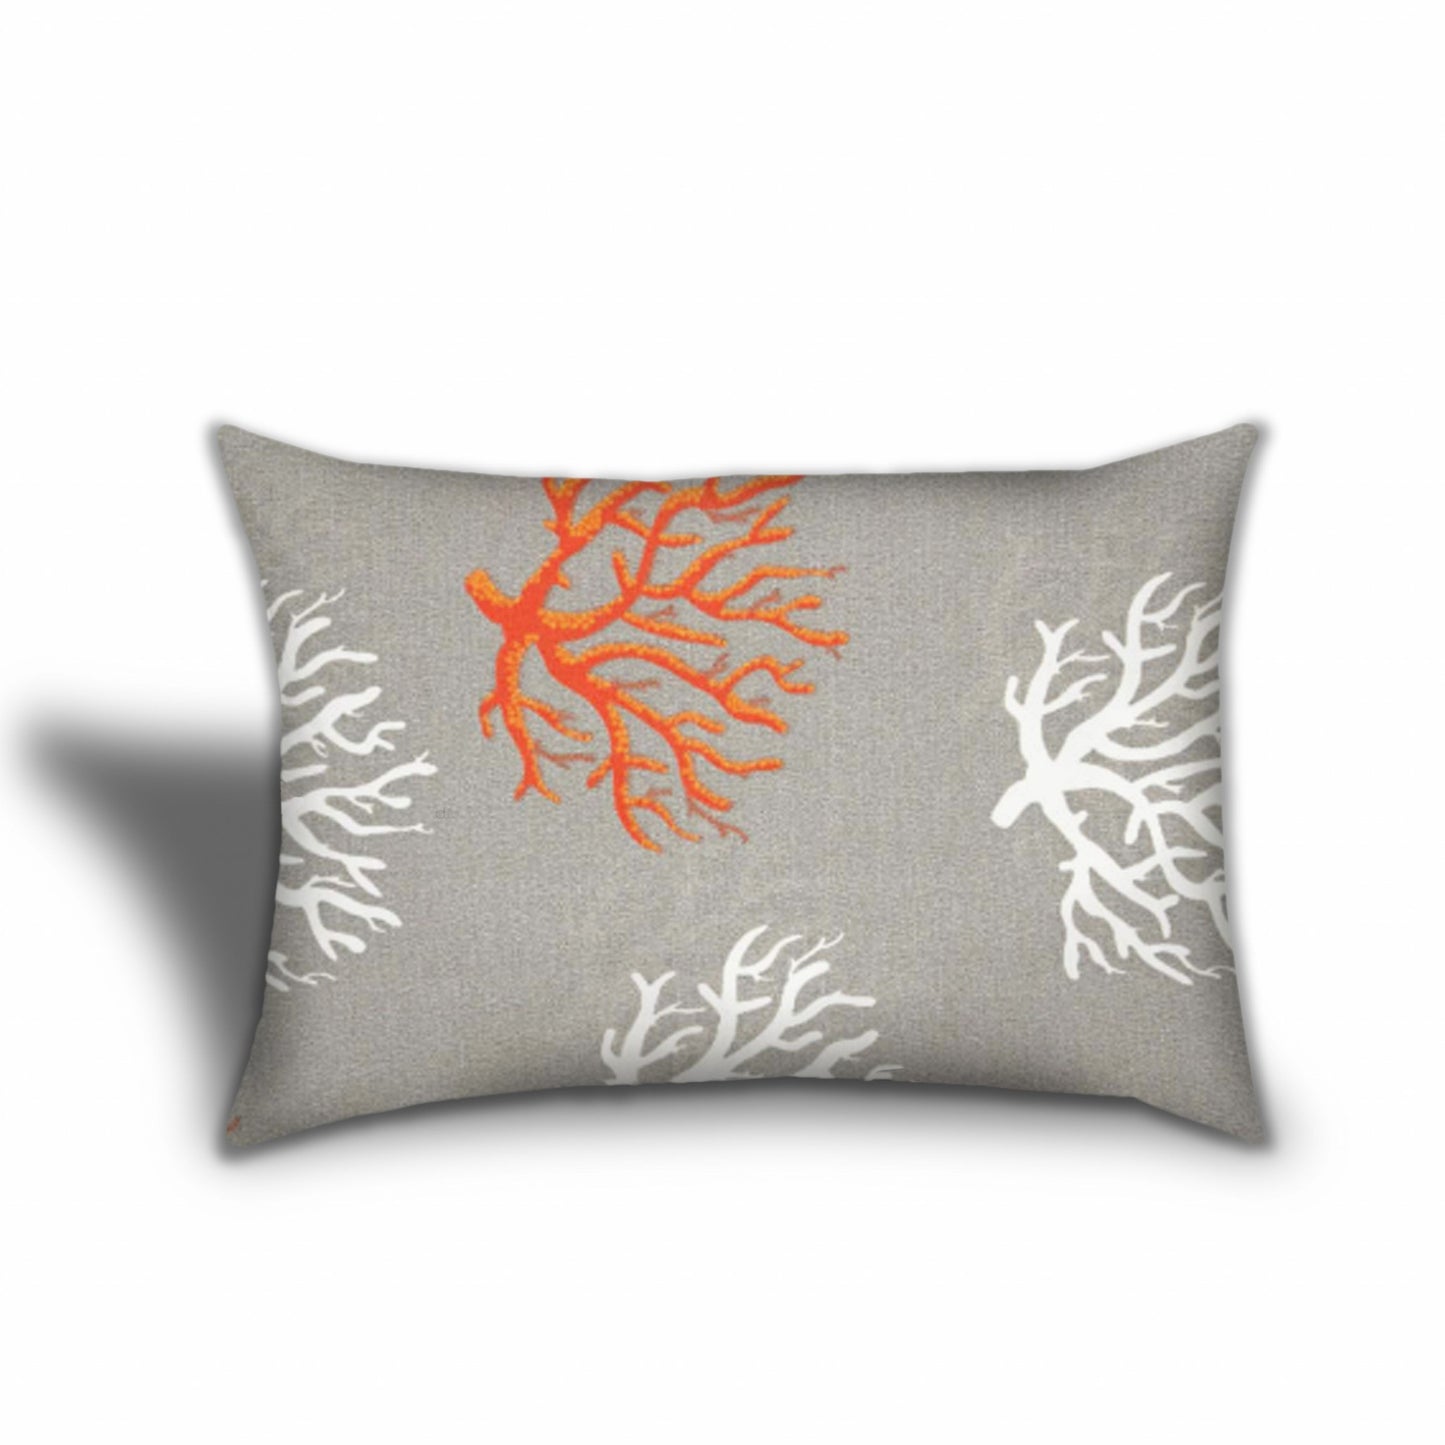 Set Of Three 18" X 18" Gray And White Blown Seam Floral Throw Indoor Outdoor Pillow